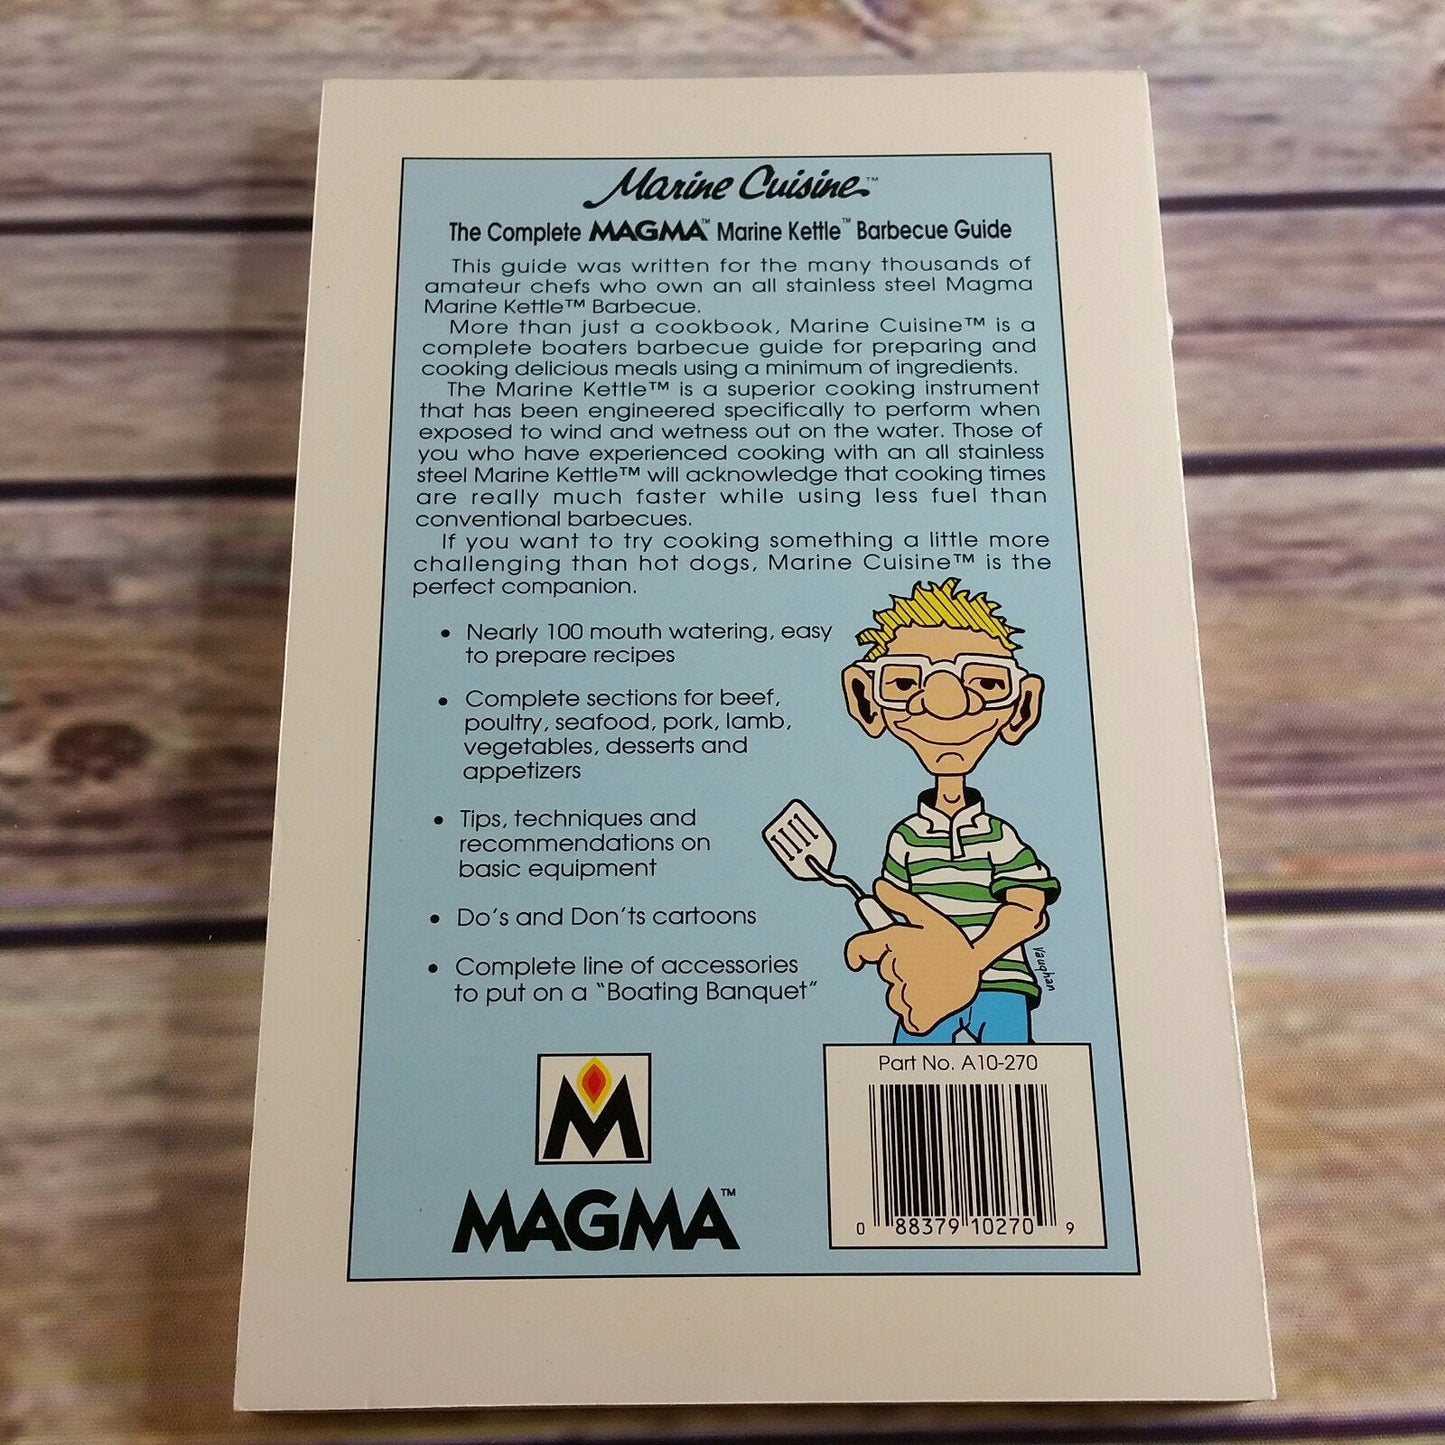 Vintage Cookbook Marine Cuisine The Complete MAGMA Marine Kettle Barbecue Guide Vaughan and Krafft